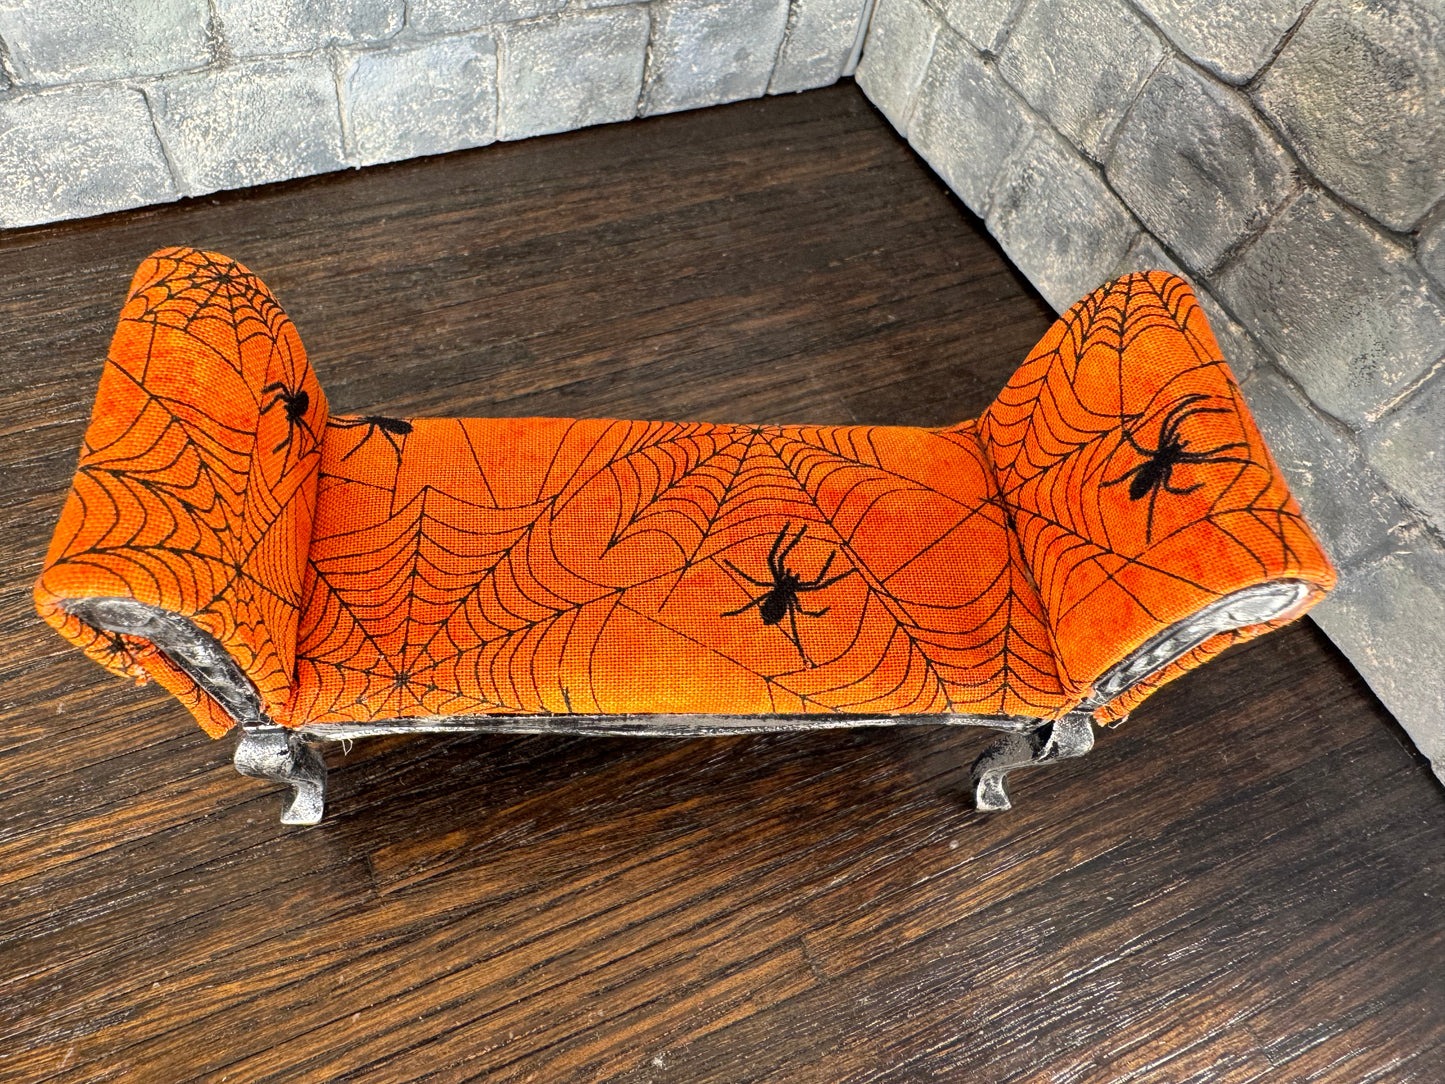 Cobwebs and Spiders on Orange Bench - 1:12 Scale